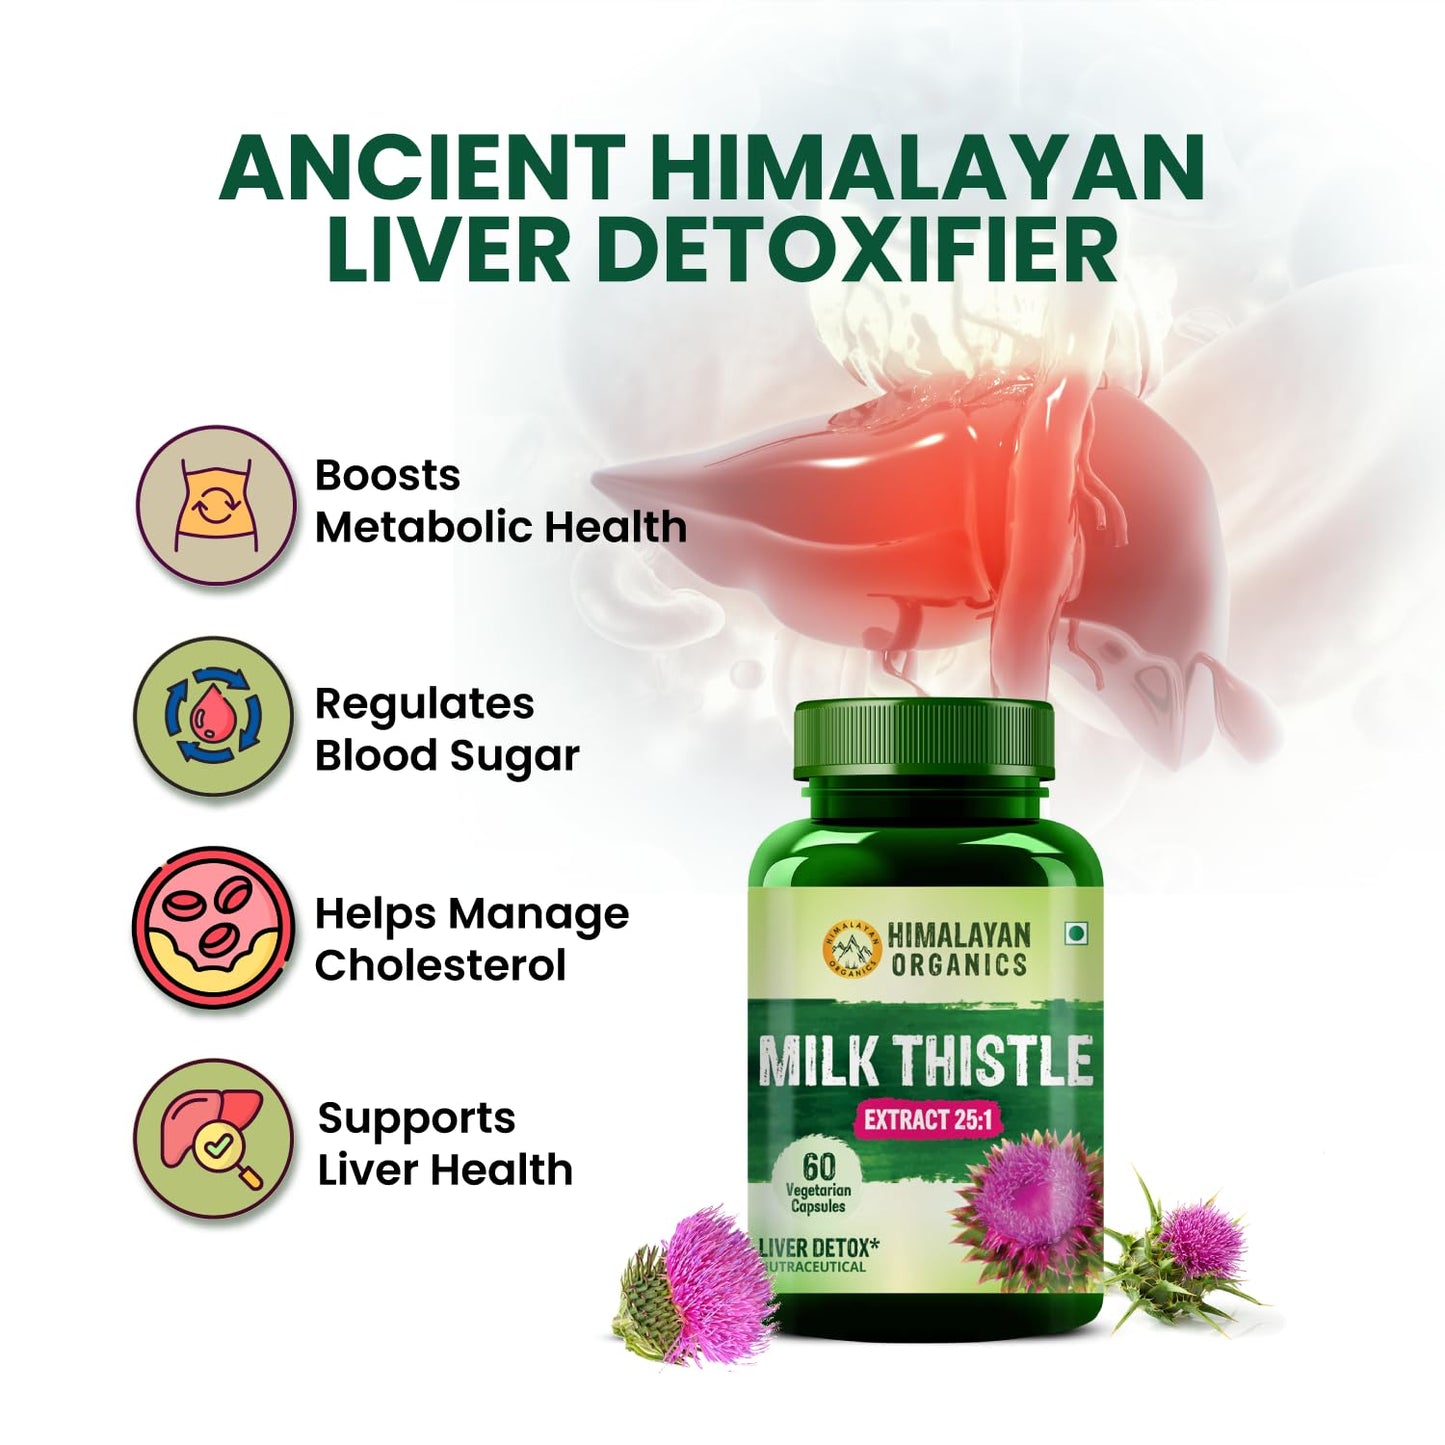 Himalayan Organics Milk Thistle Extract Detox Supplement For Men And Women With 800Mg Of Silybum Marianum For Healthy Liver | Helps in Cleanse Liver - 60 Vegetarian Capsules